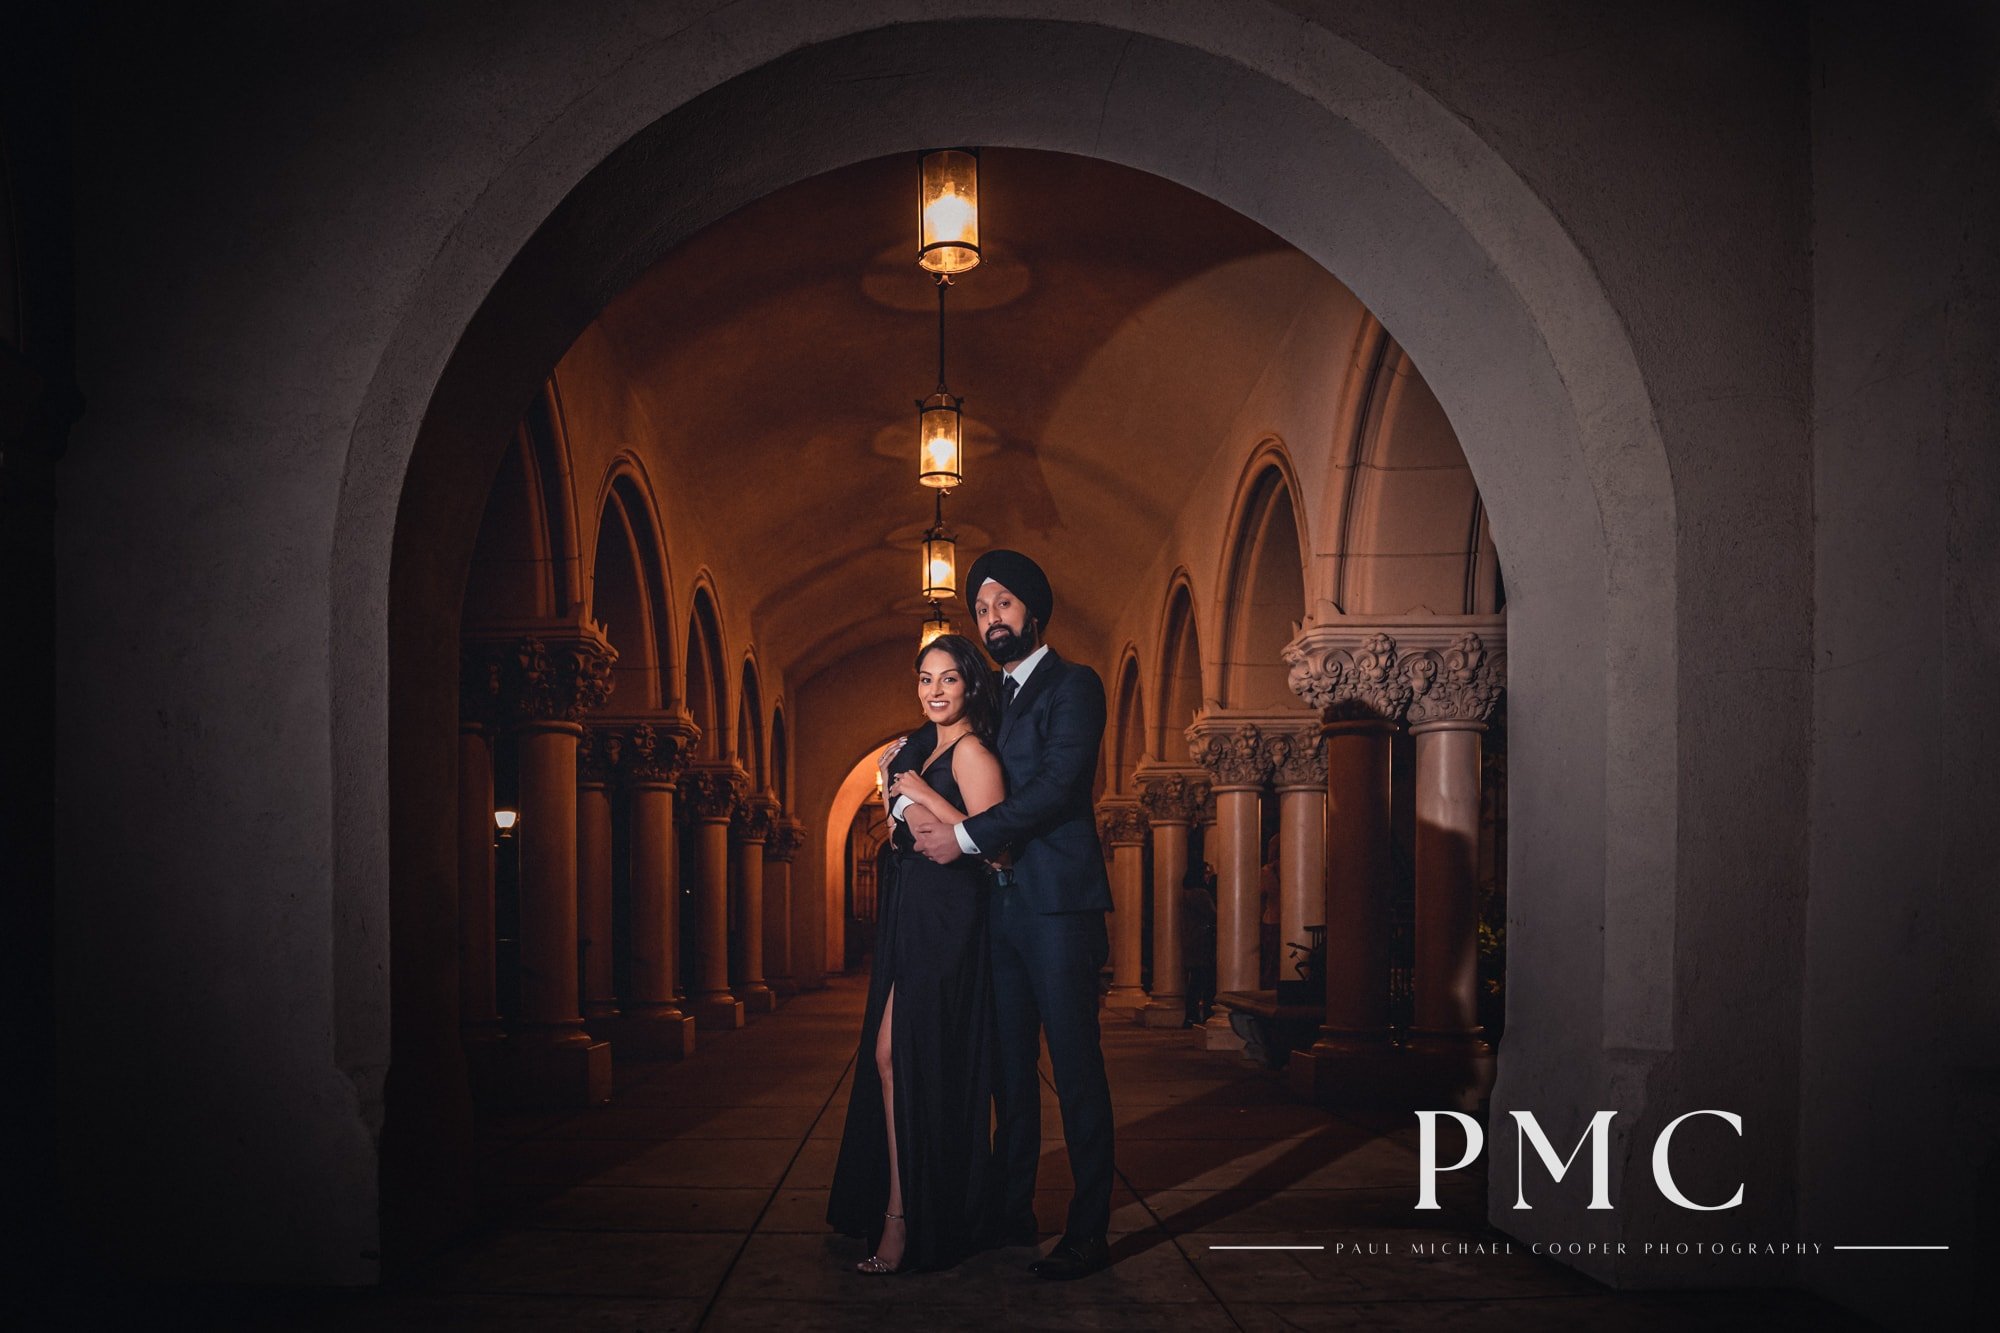 Gurnoor + Harman | A Stylish Ocean Proposal and Iconic Architecture Engagement Celebration | San Diego, CA